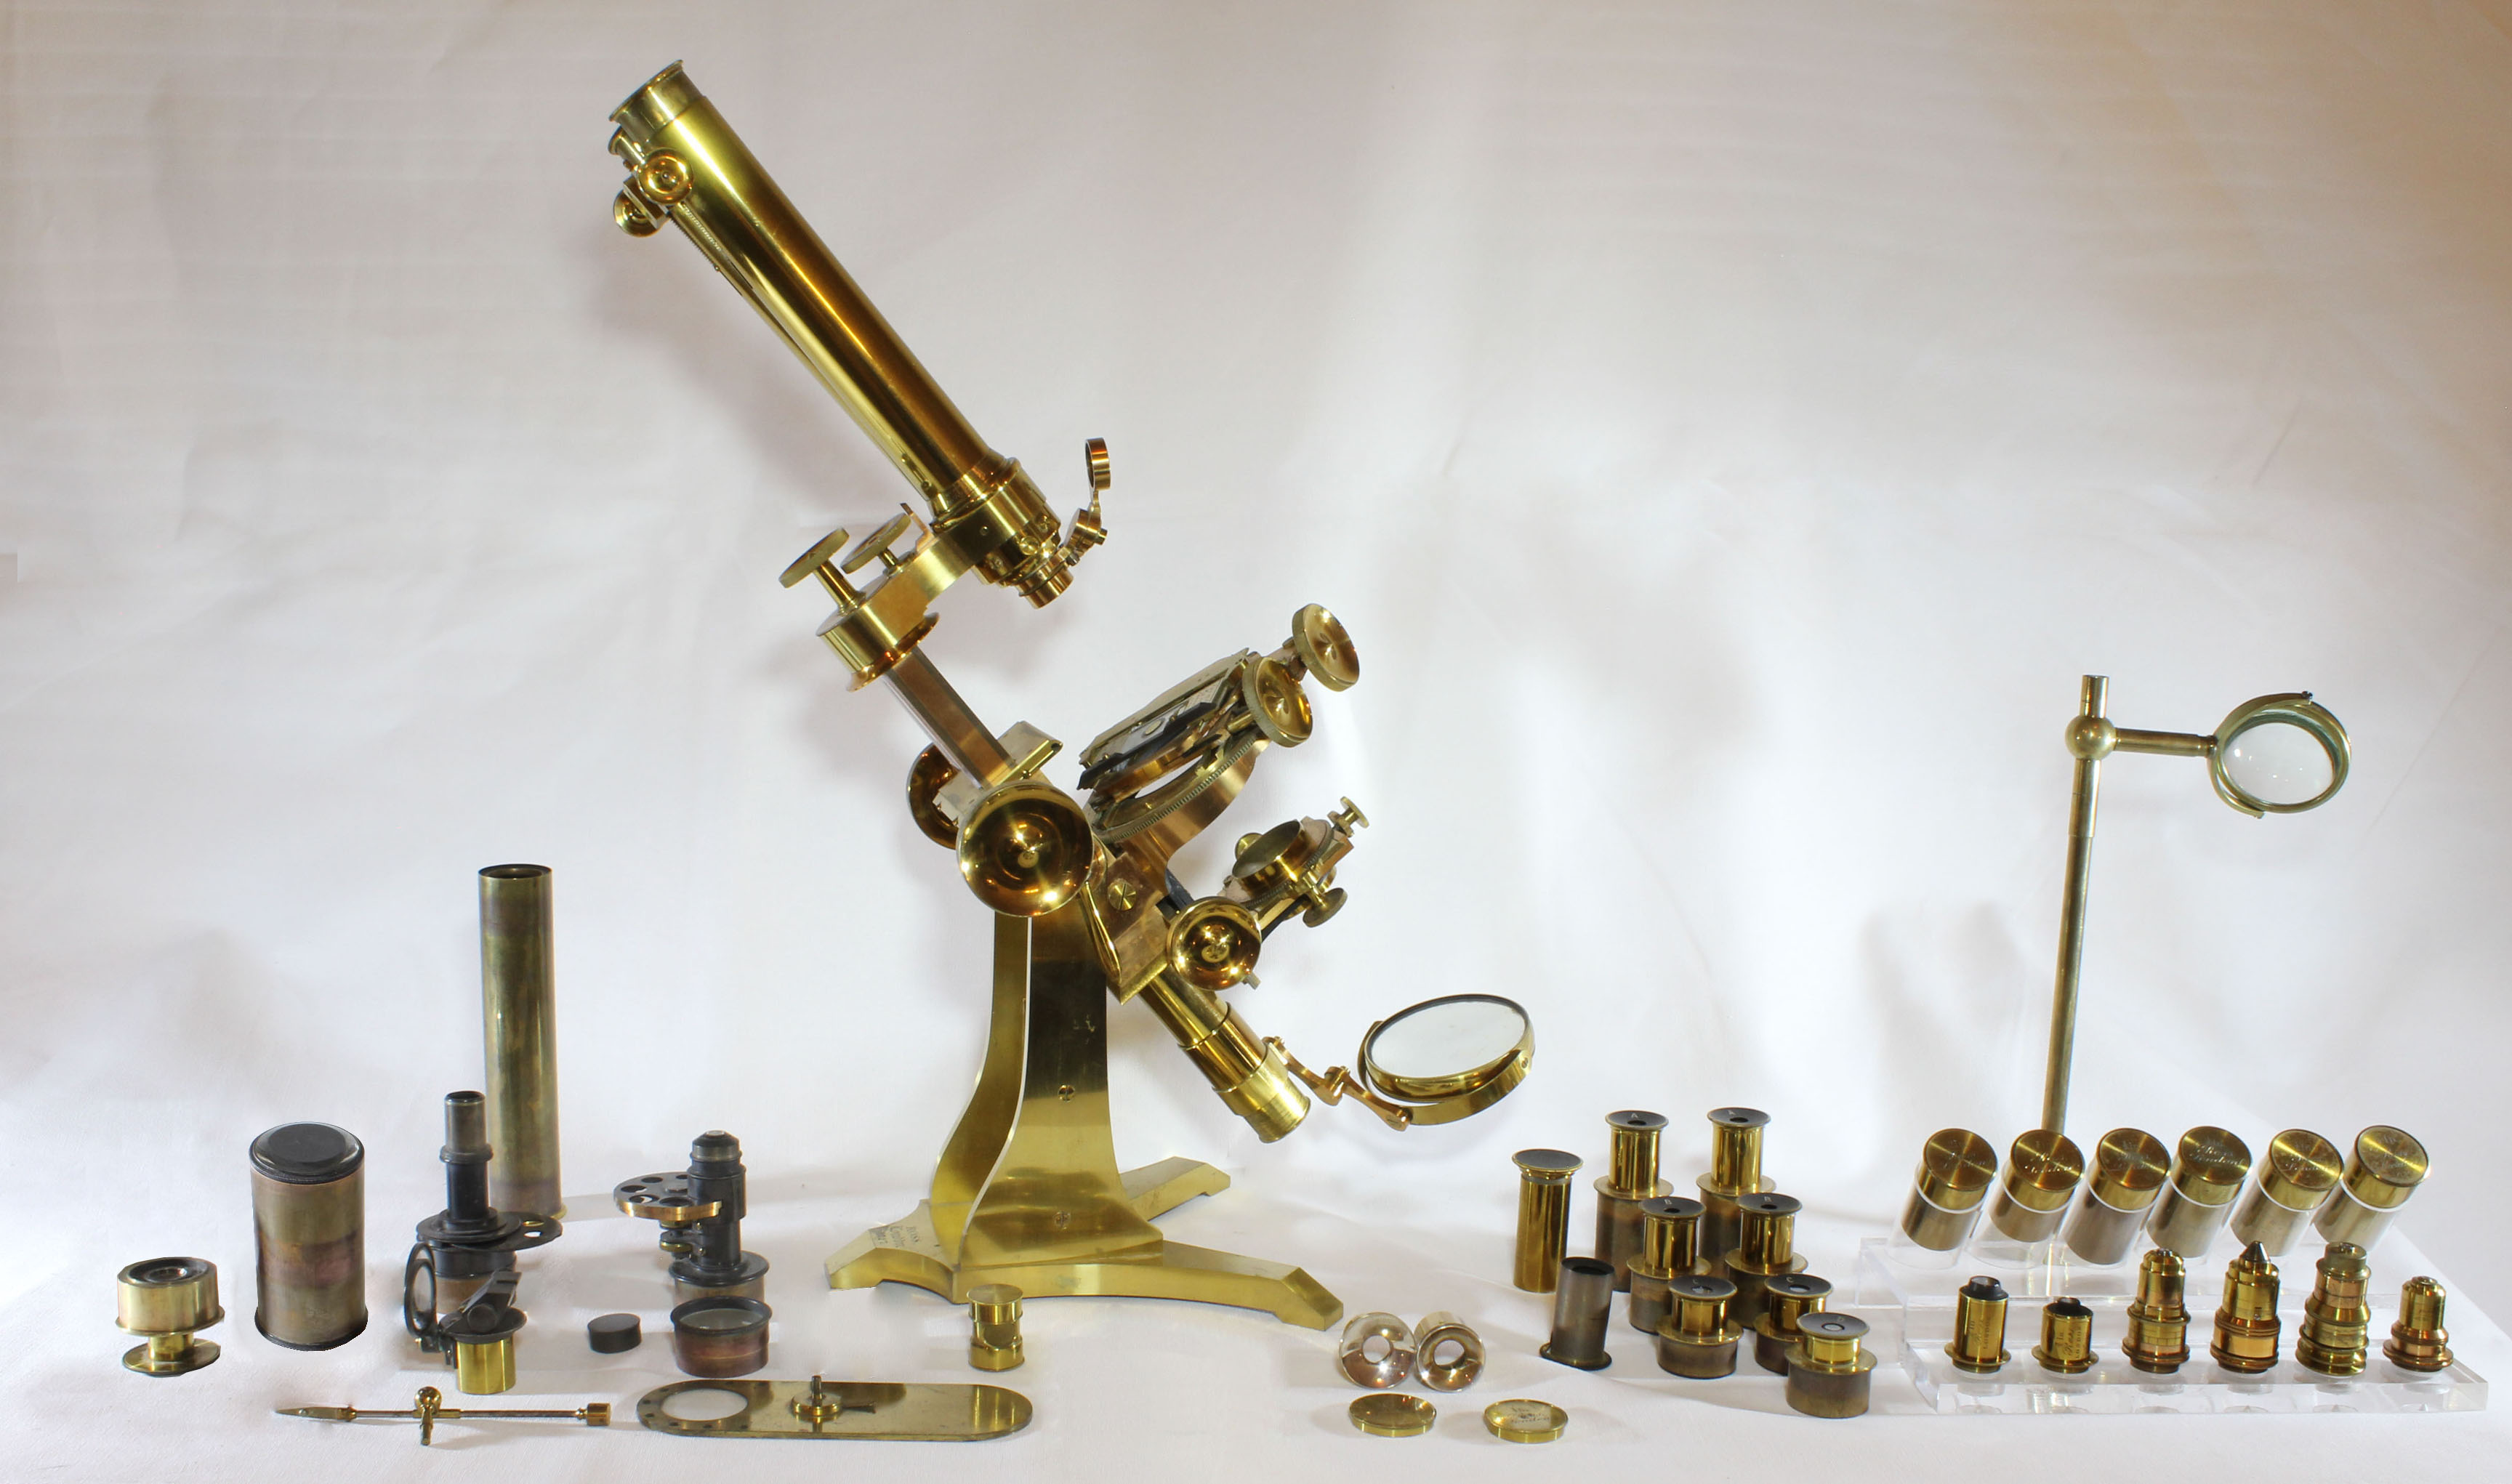 Ross Microscope with Accessories